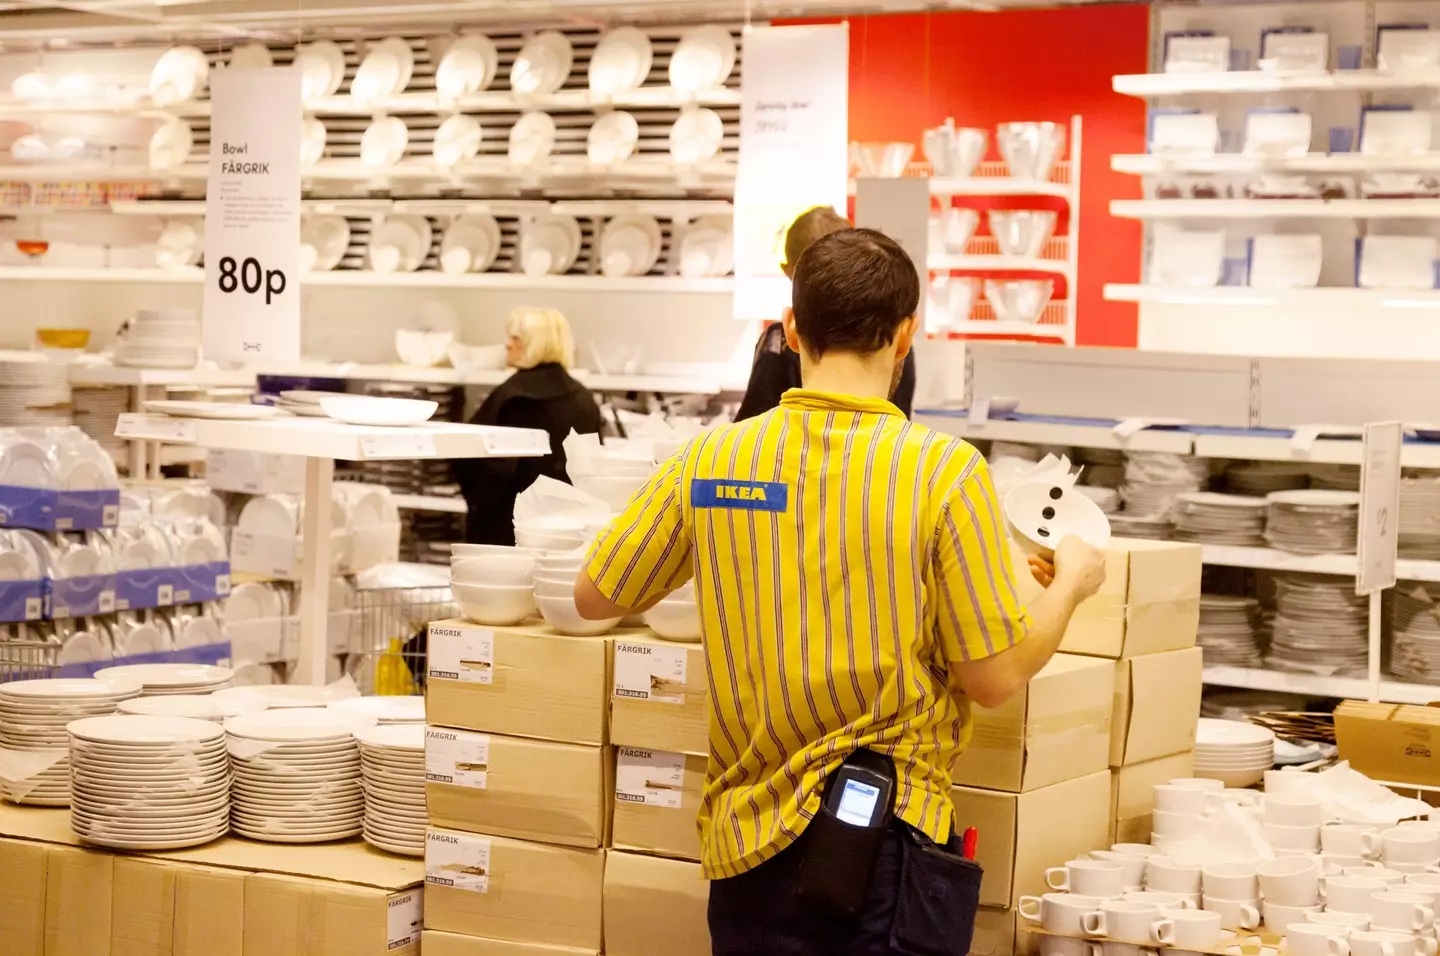 Unvaccinated staff at Ikea will not receive the full sick pay.